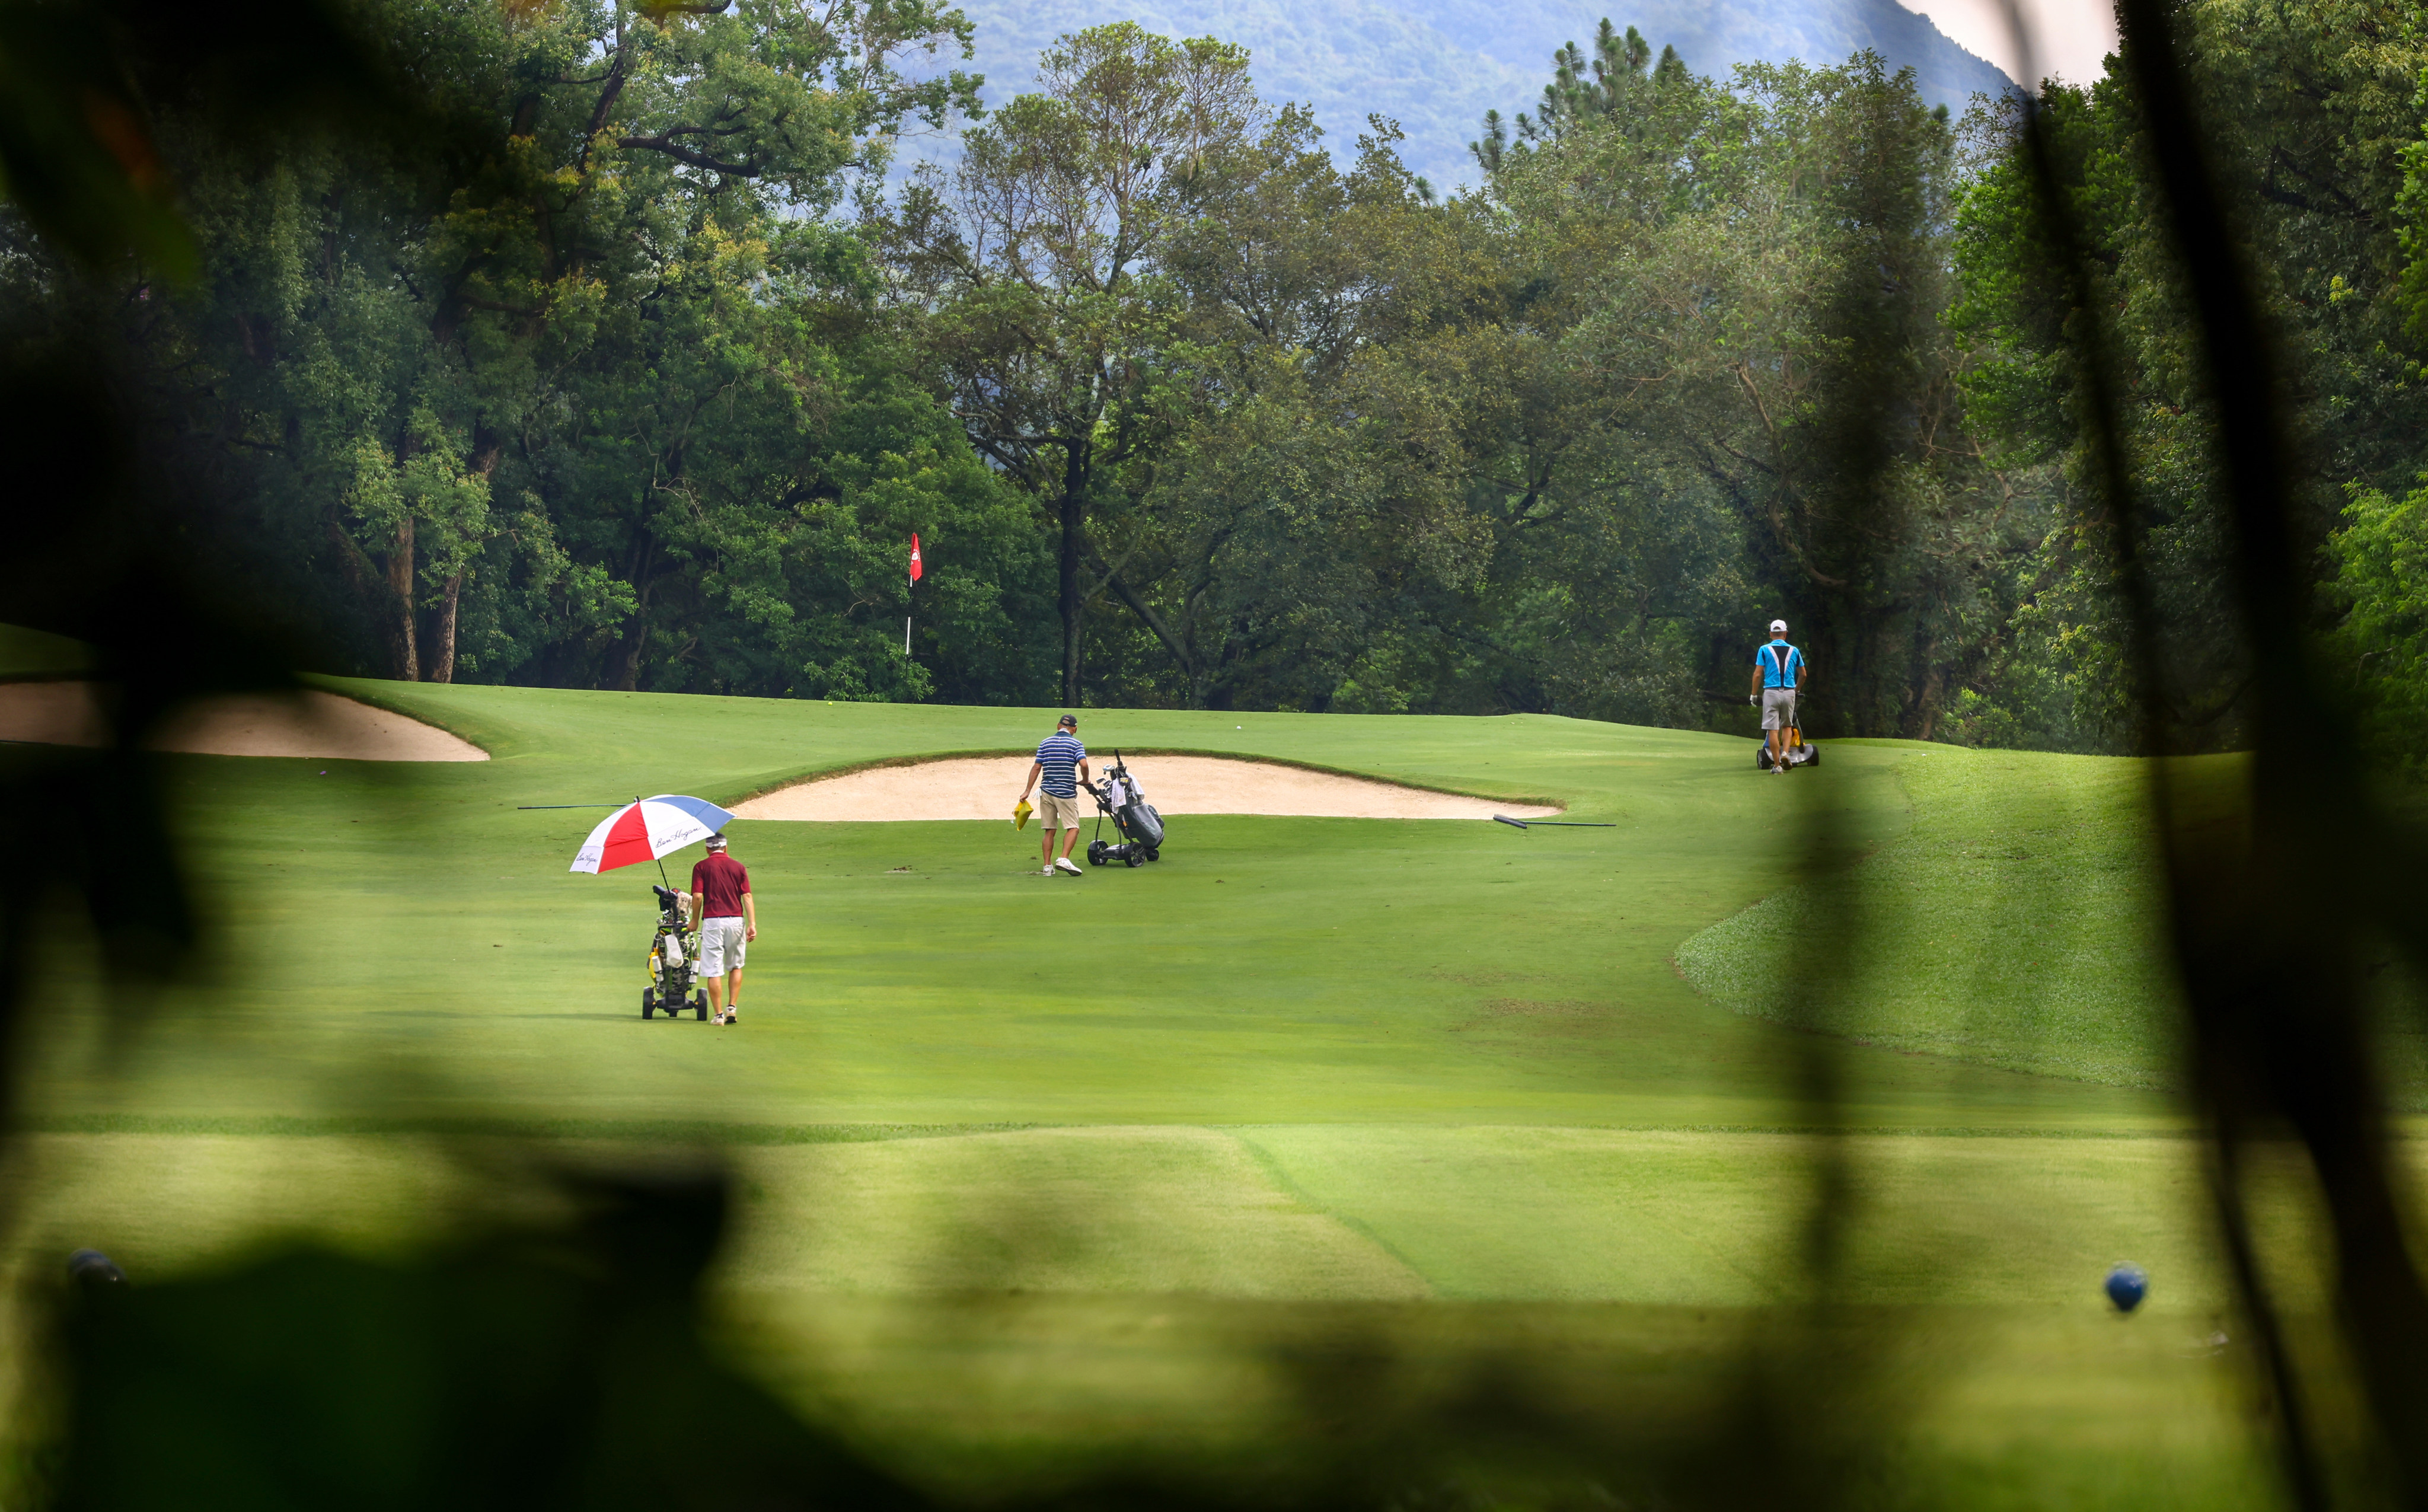 Golfers playing golf at the Hong Kong Golf Club in Fanling on June 14. Even if the proposal to build housing on part of the Old course goes ahead, the impact on club members will be minimal. Hong Kong will be the bigger loser. Photo: Dickson Lee 